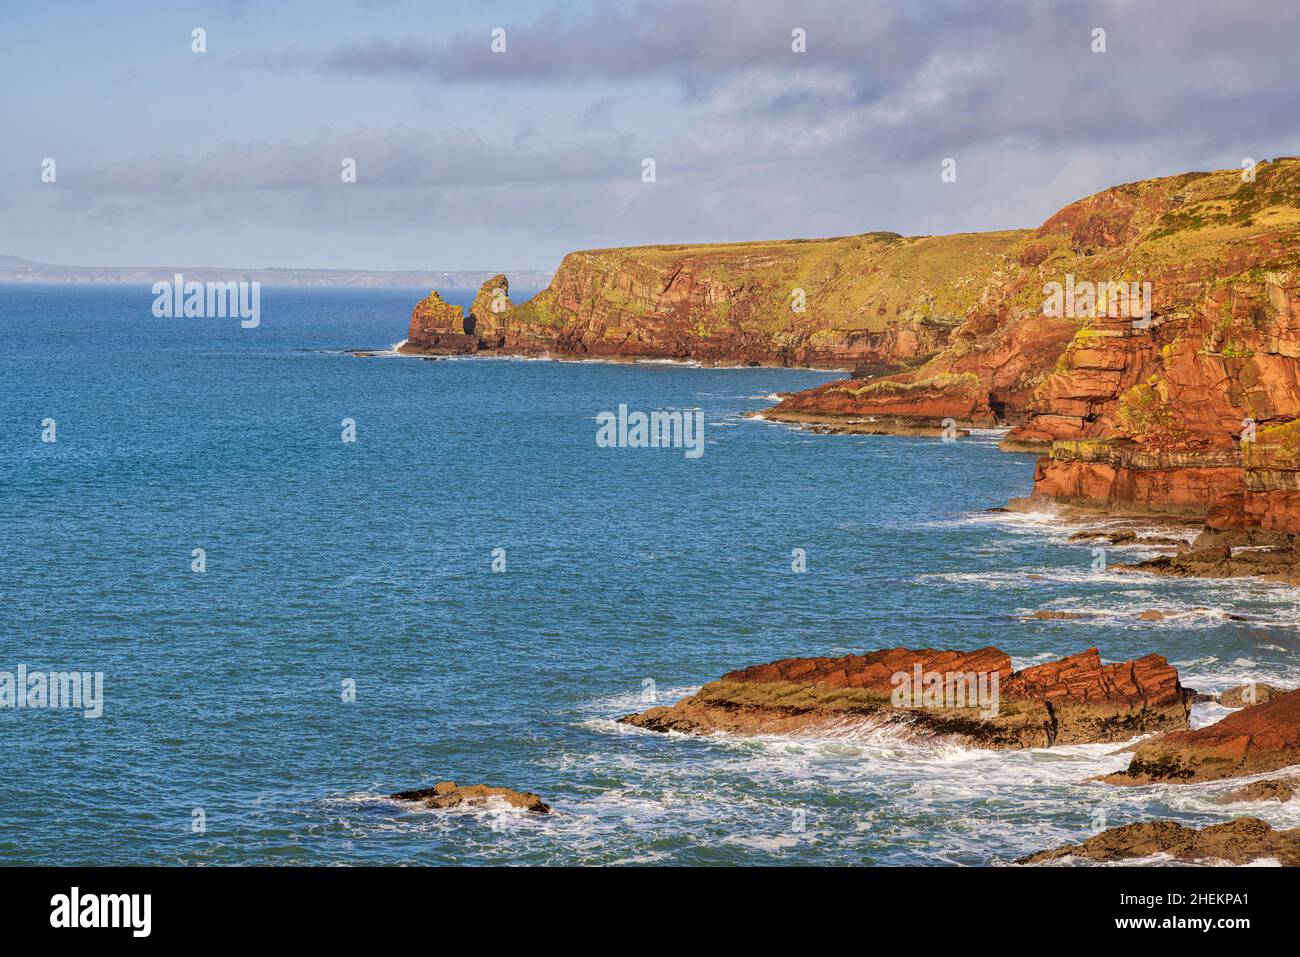 The sandstone cliffs of St Brides Bay In the Pembrokeshire Coast National Park, South Wales Stock Photo